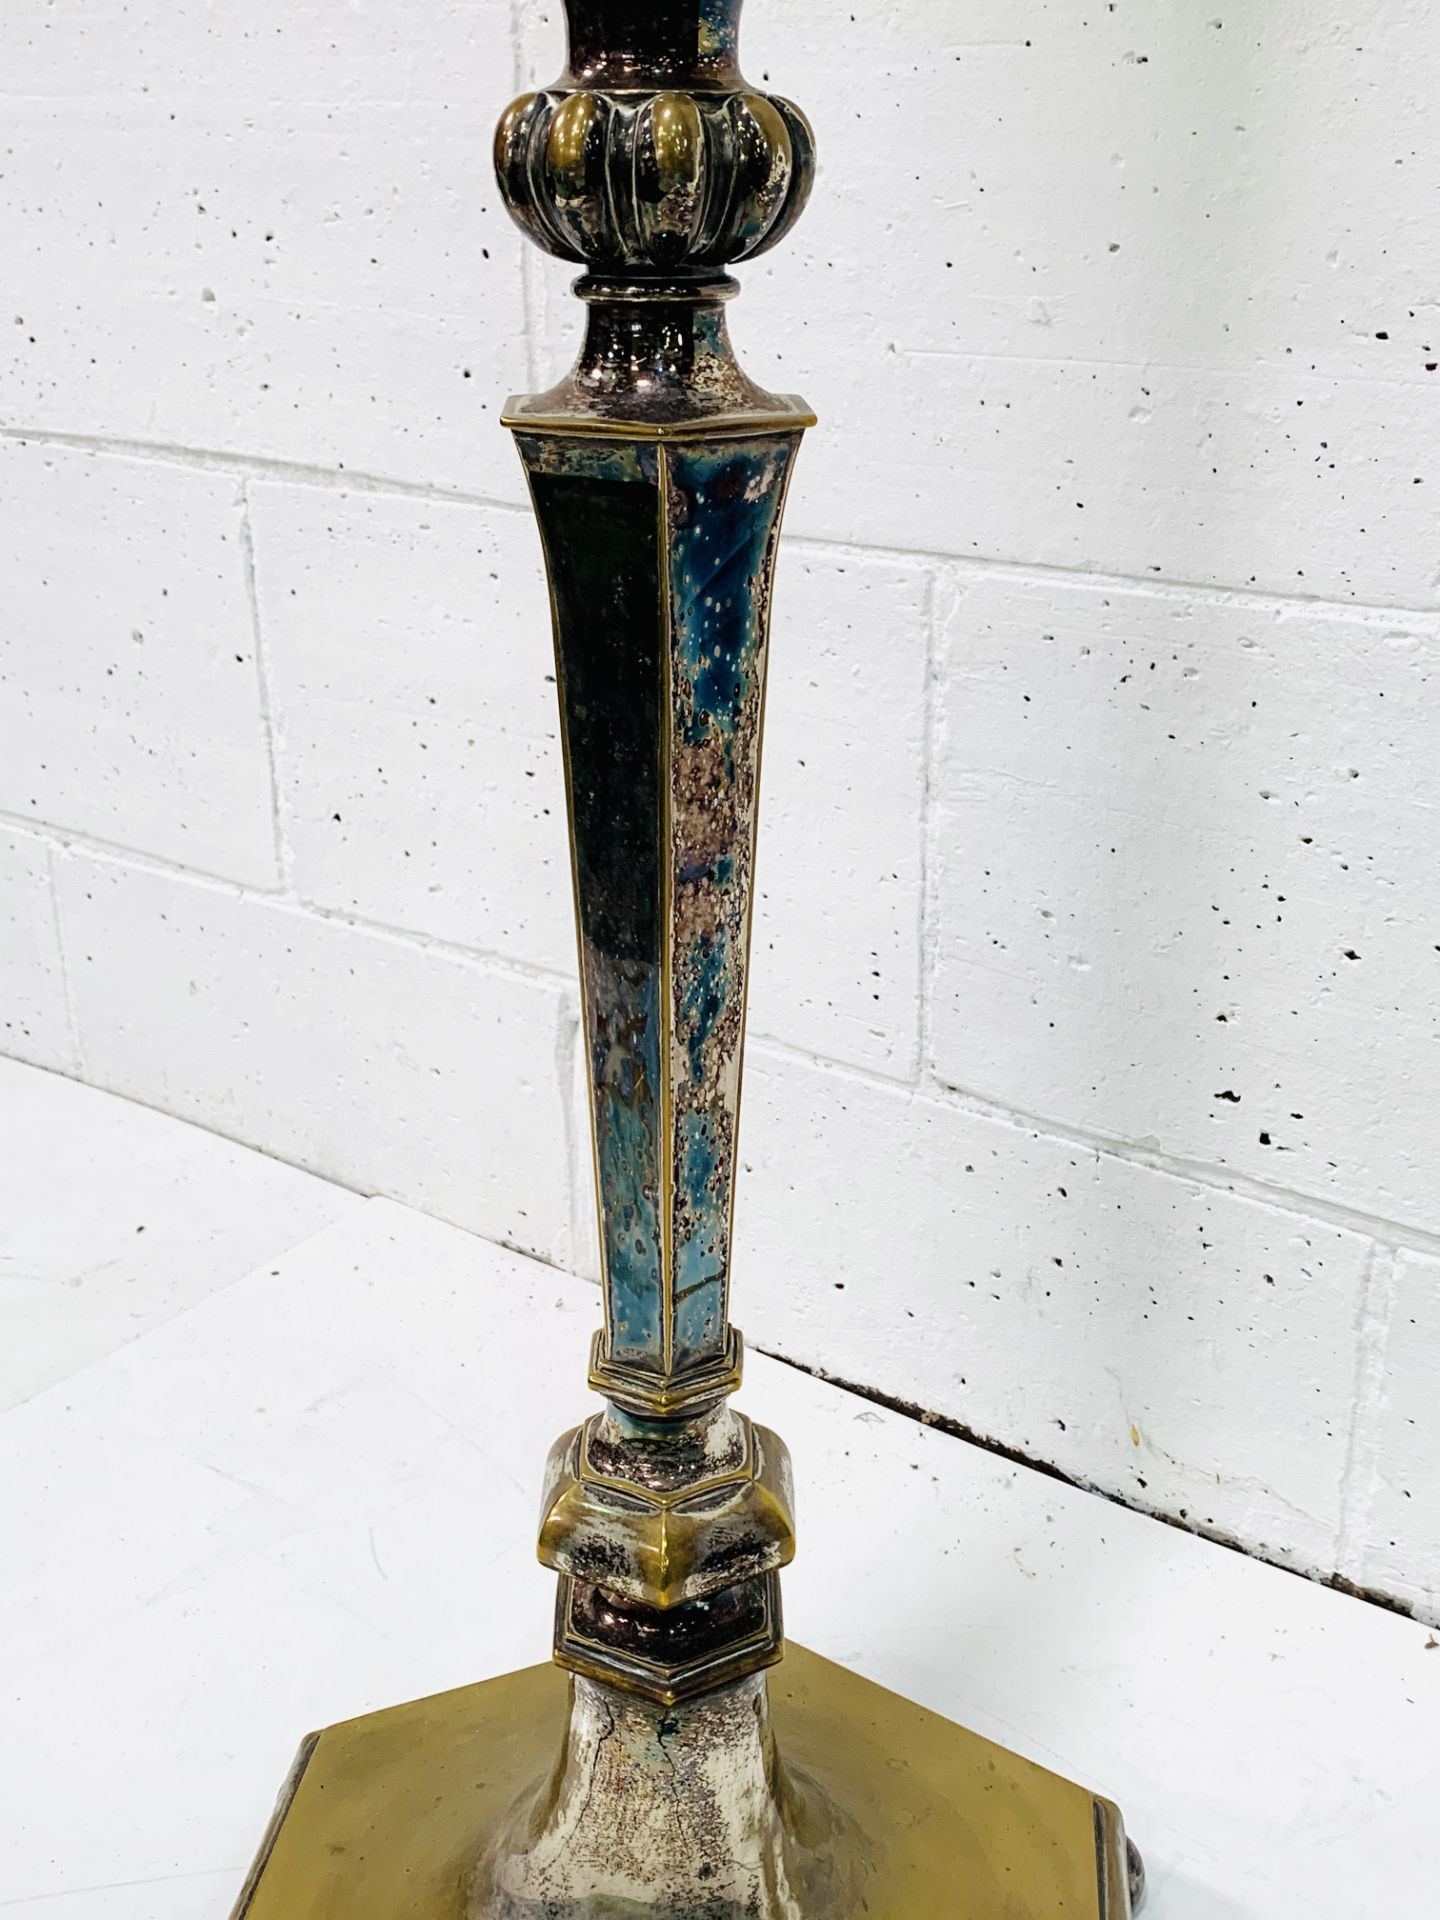 Decorative silver plate on brass floor standing oil lamp, converted to electricity - Image 5 of 5